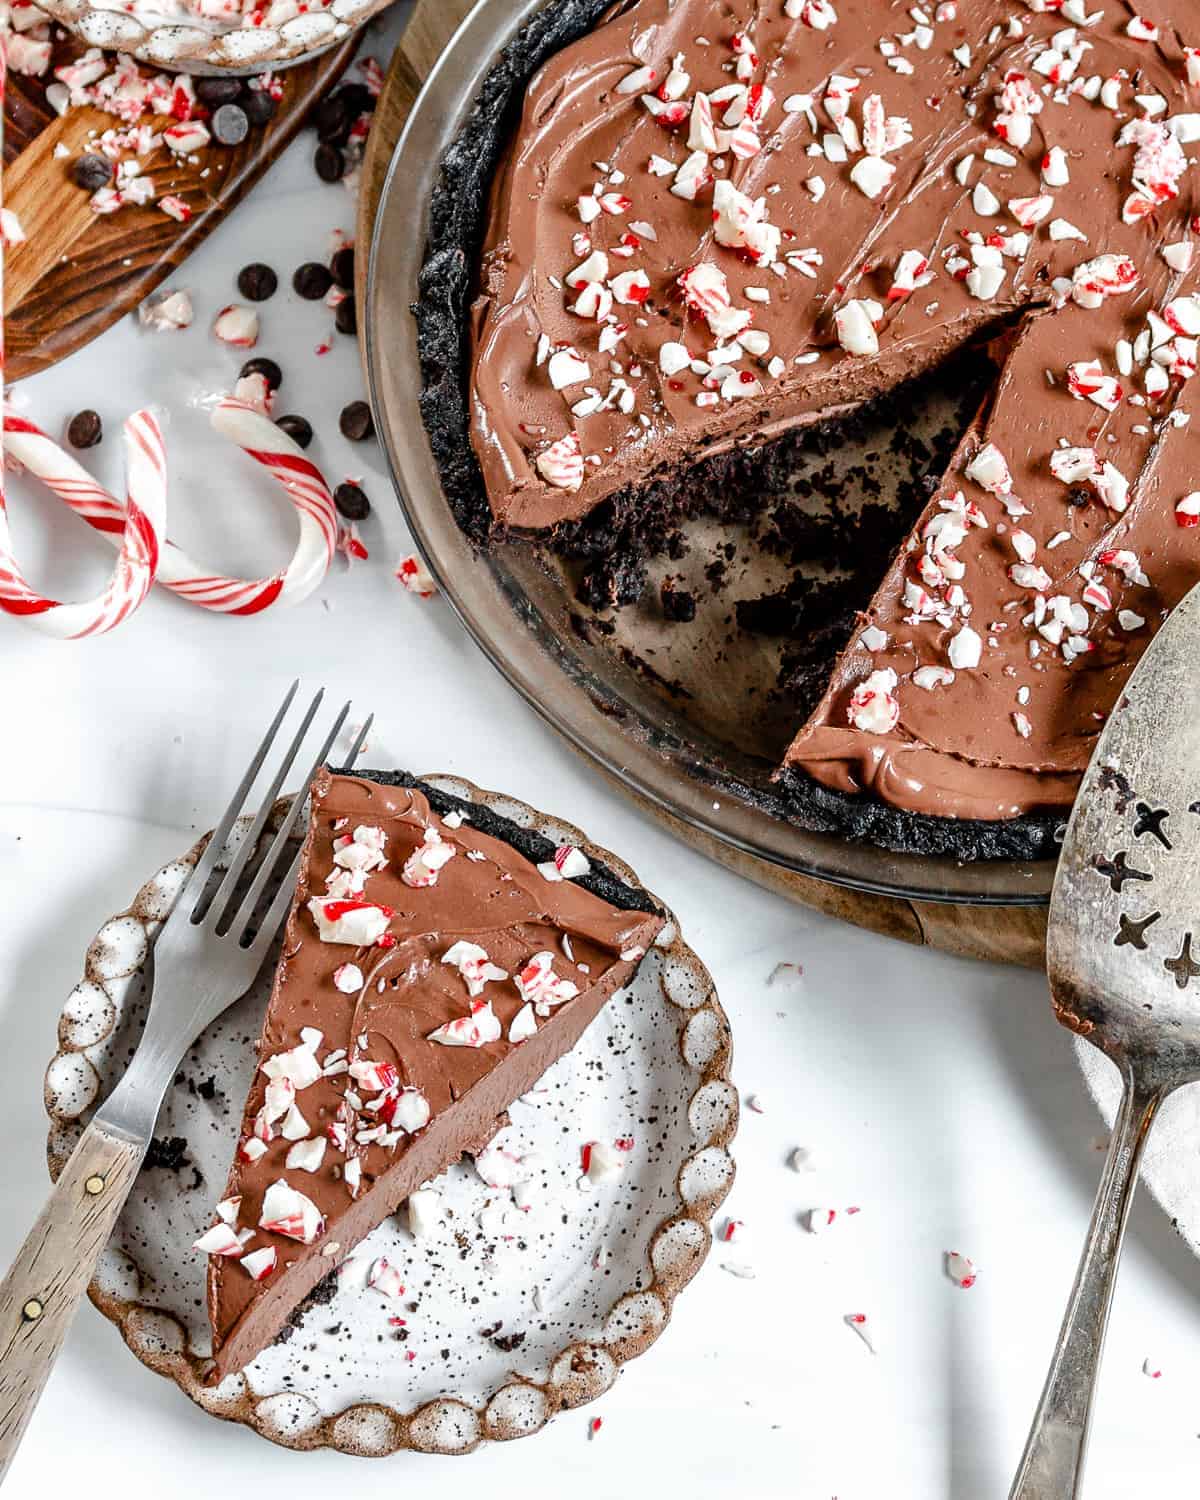 completed slice of Silken Chocolate Peppermint Pie plated with more pie in the background